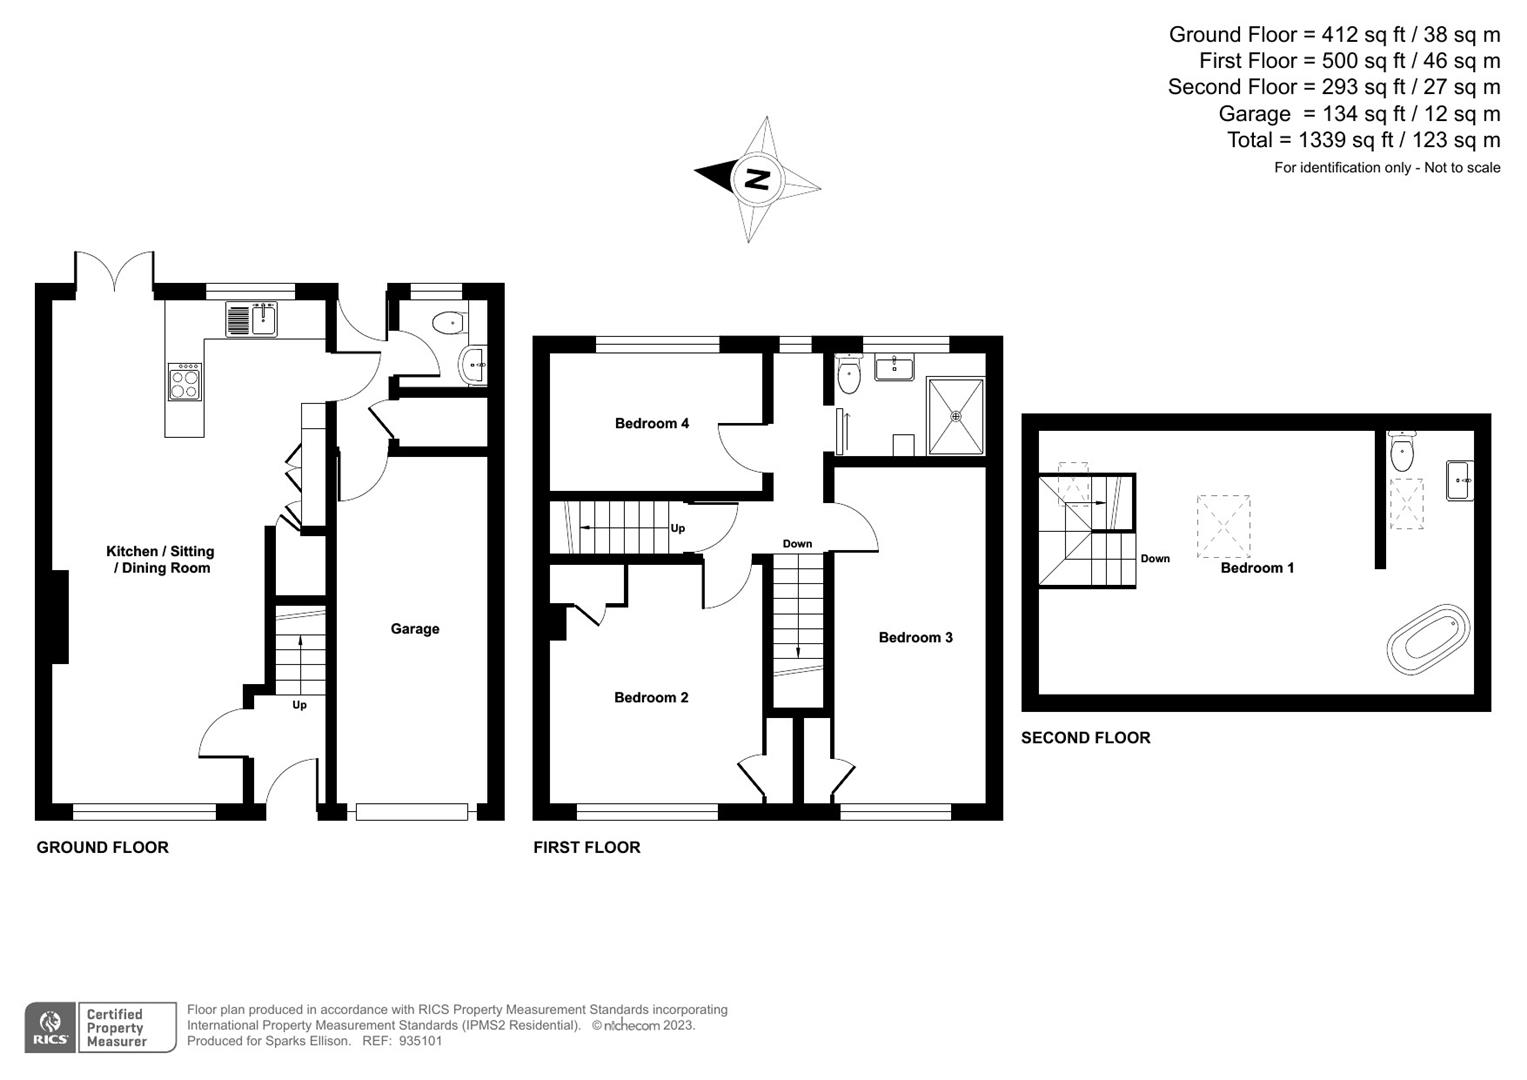 Carthage Close, Scantabout, Chandler’s Ford floorplan